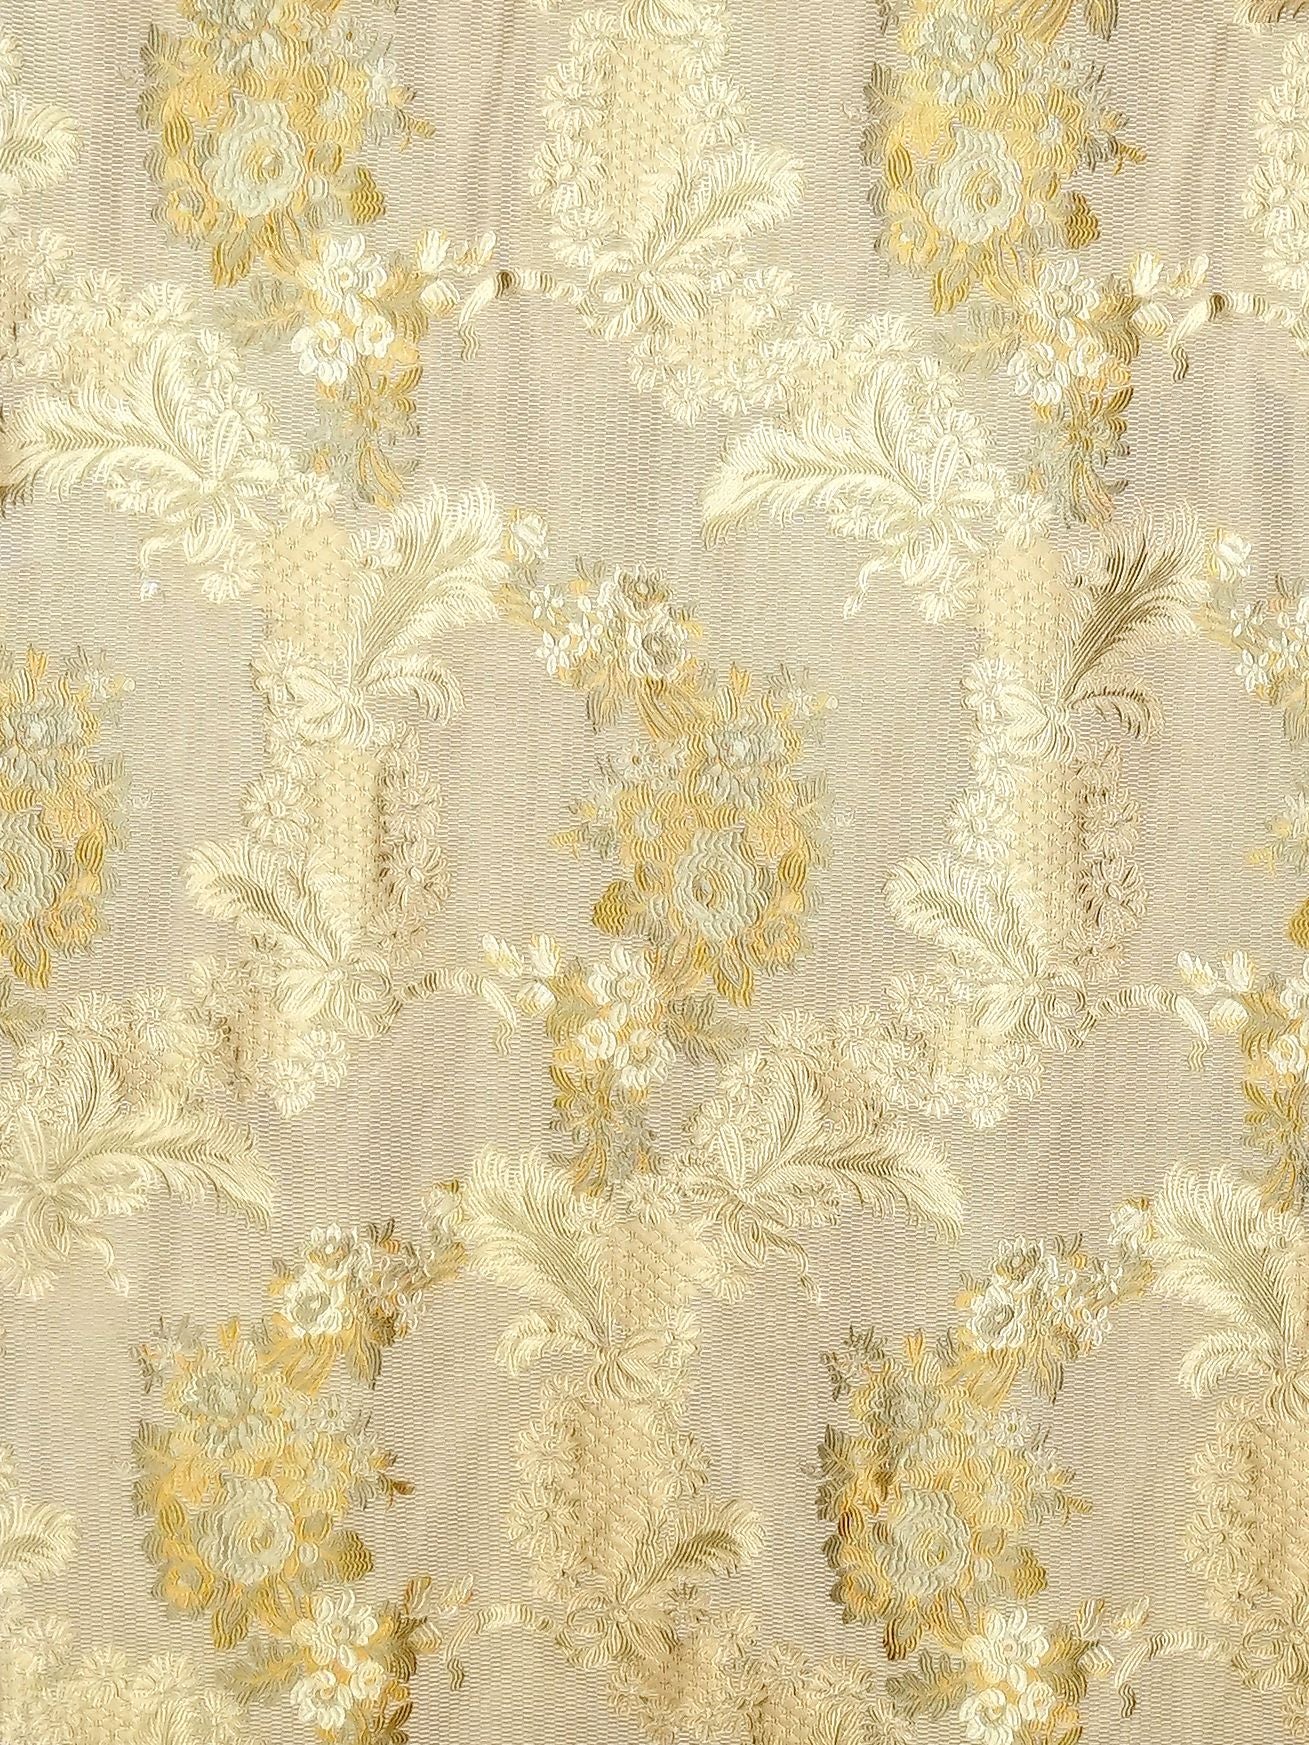 La Verne fabric in topaz color - pattern number ZB 2323614A - by Scalamandre in the Old World Weavers collection